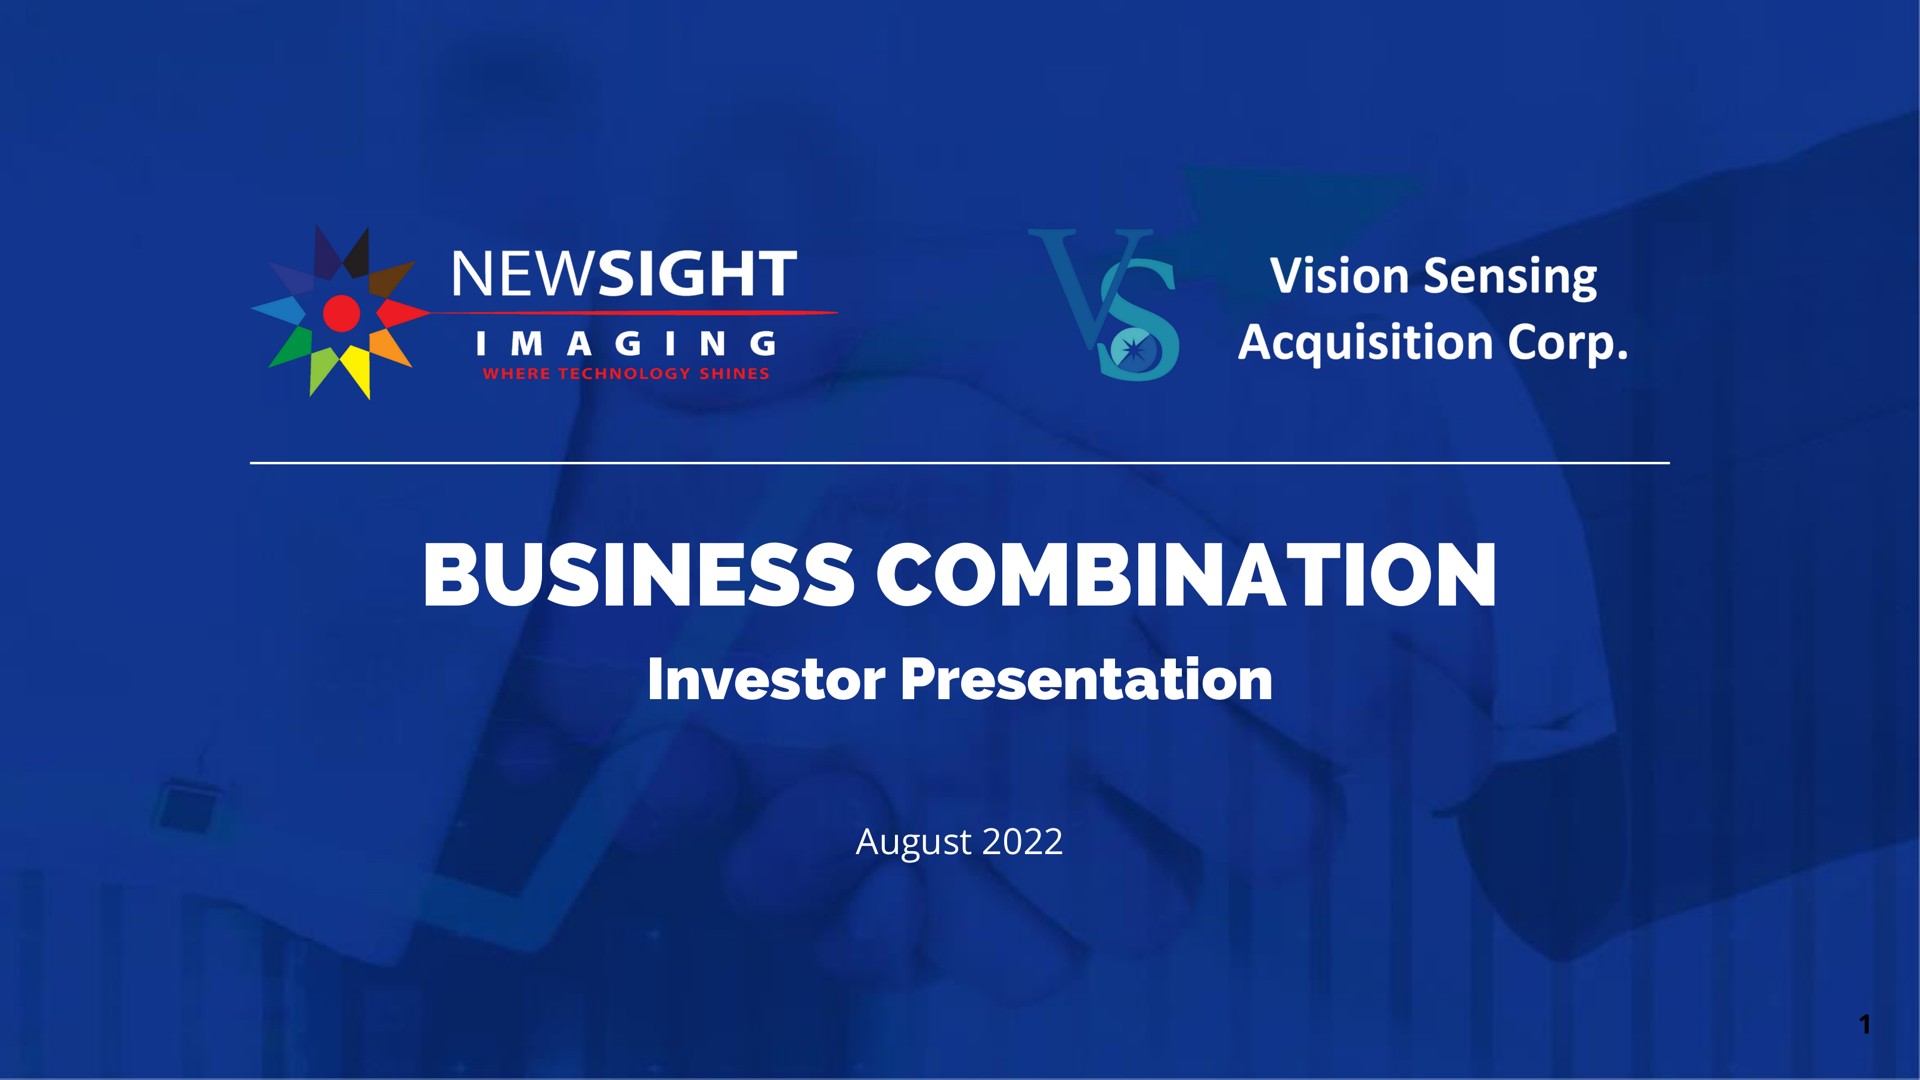 business combination investor presentation august imaging vision sensing acquisition corp | Newsight Imaging